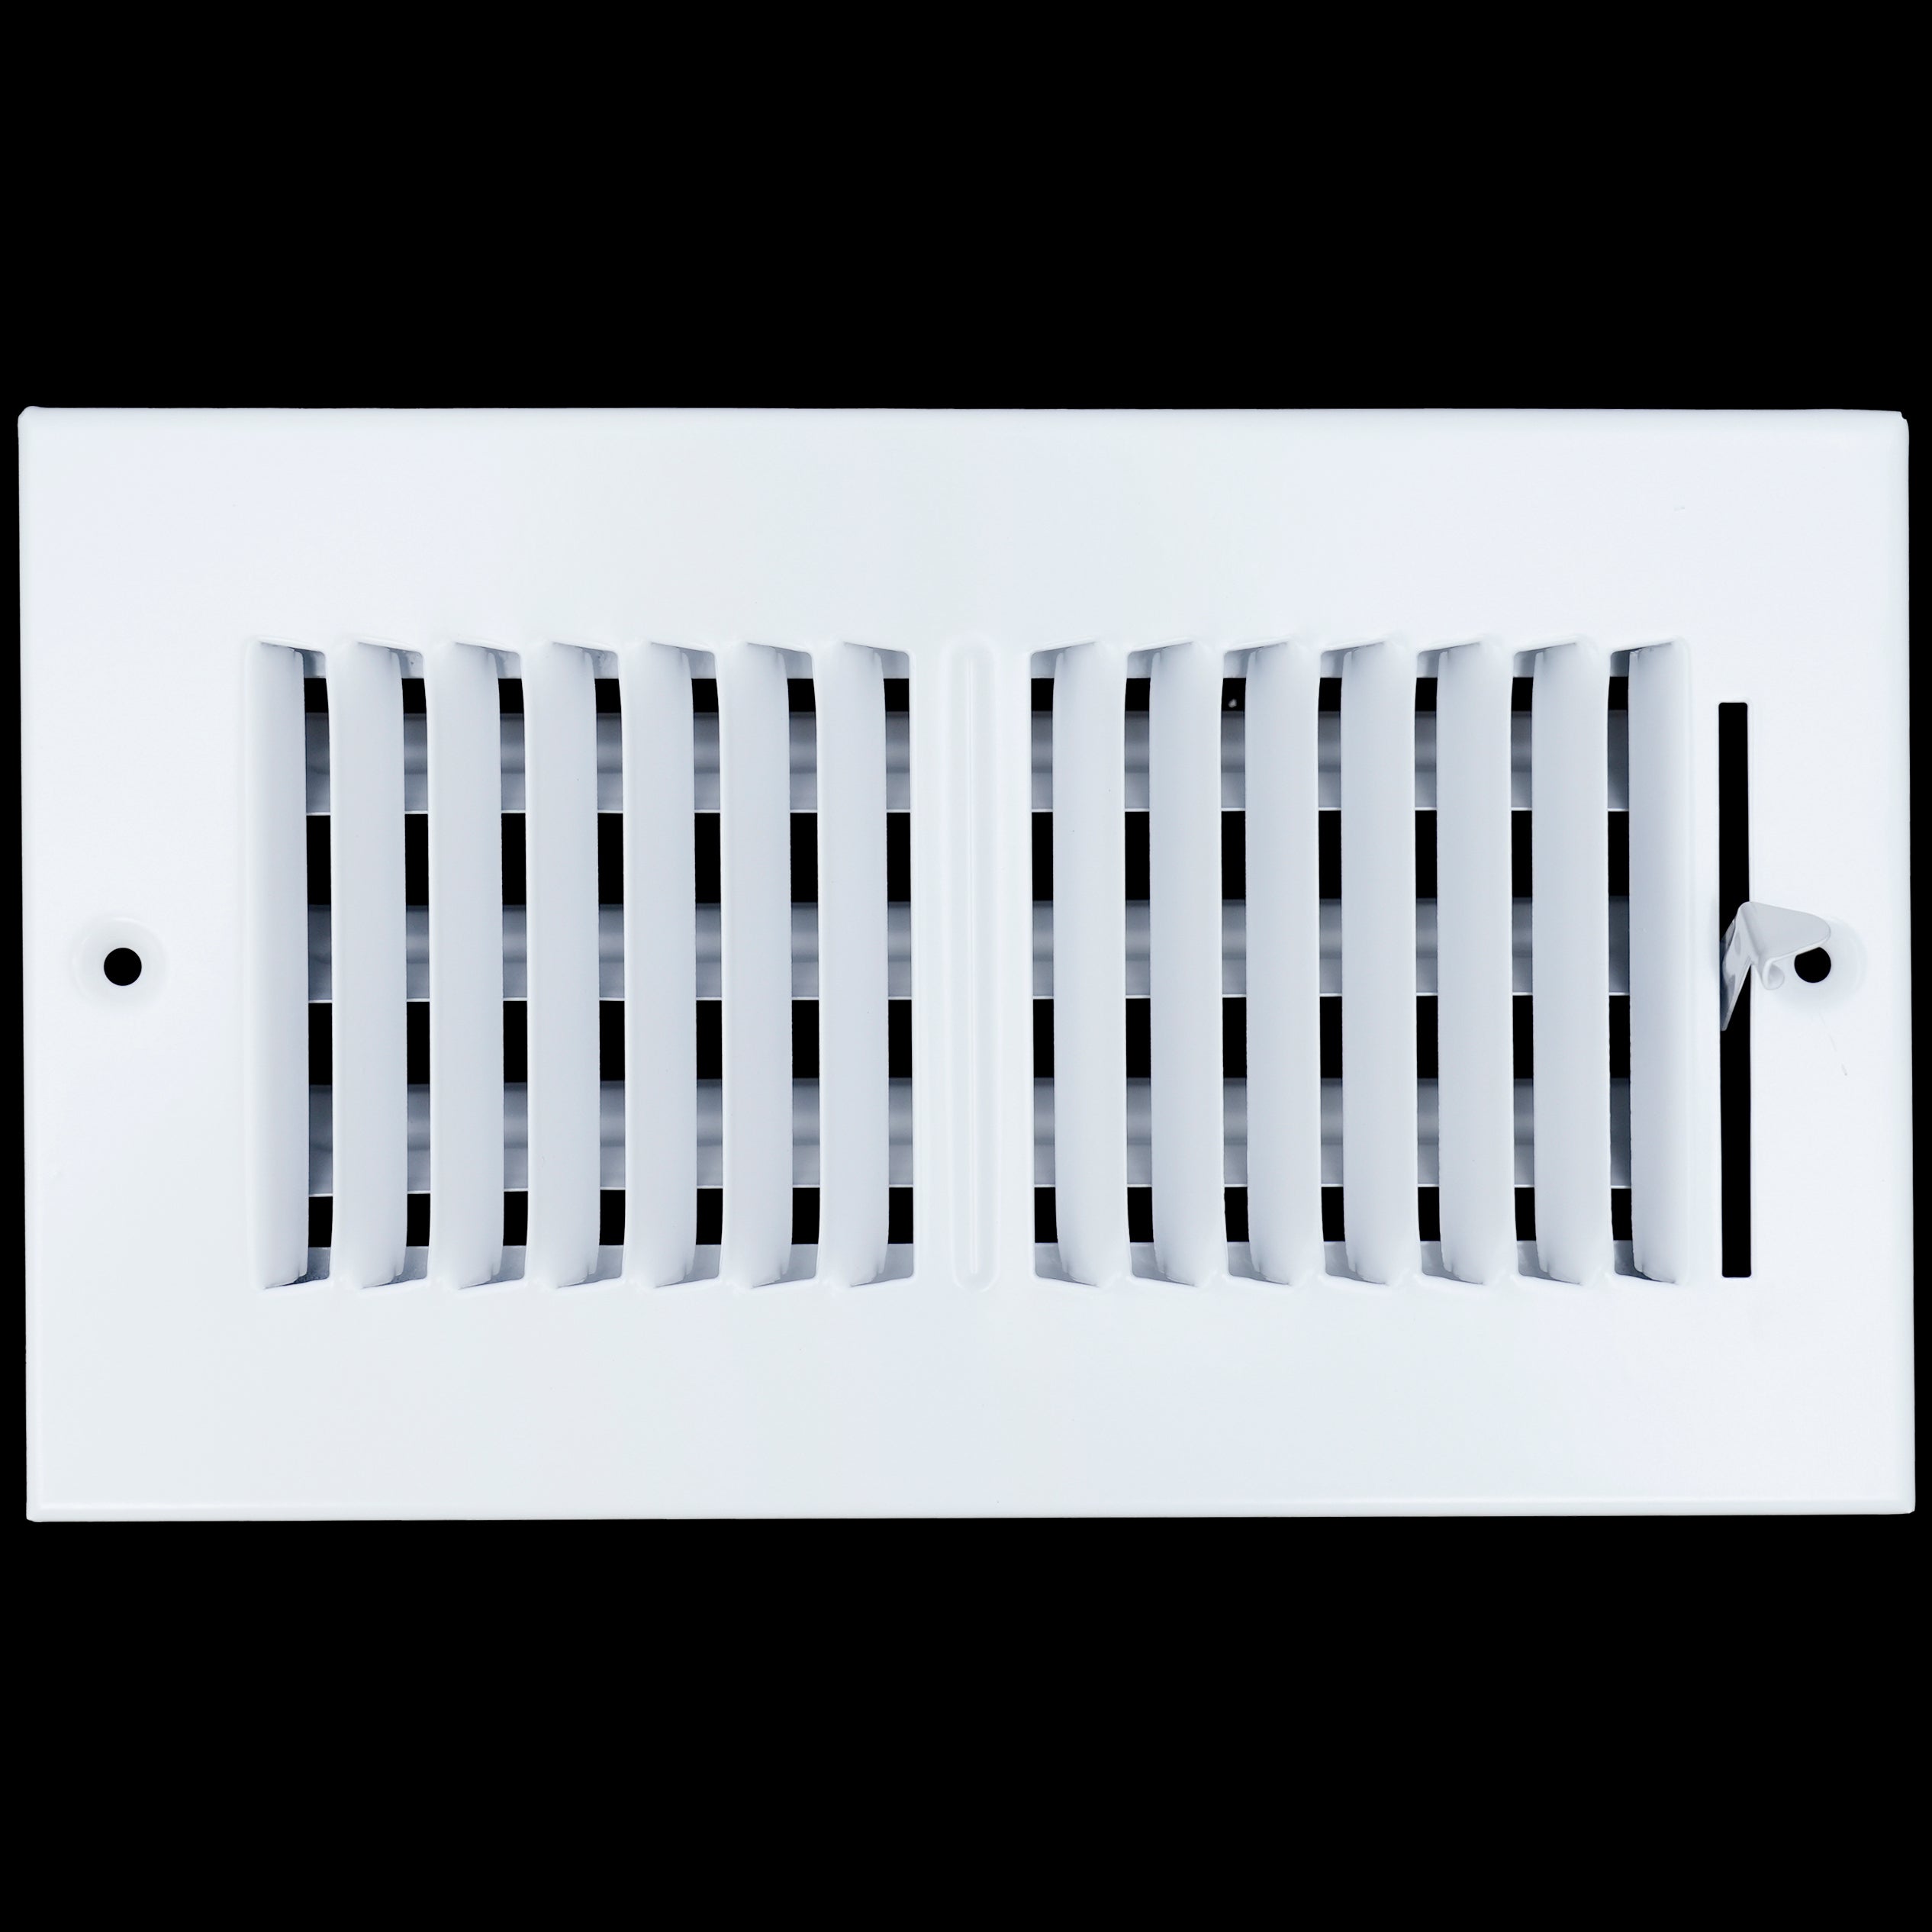 airgrilles 8 x 4 duct opening 2 way steel air supply diffuser for sidewall and ceiling hnd-asg-wh-2way-8x4 764613097818 1